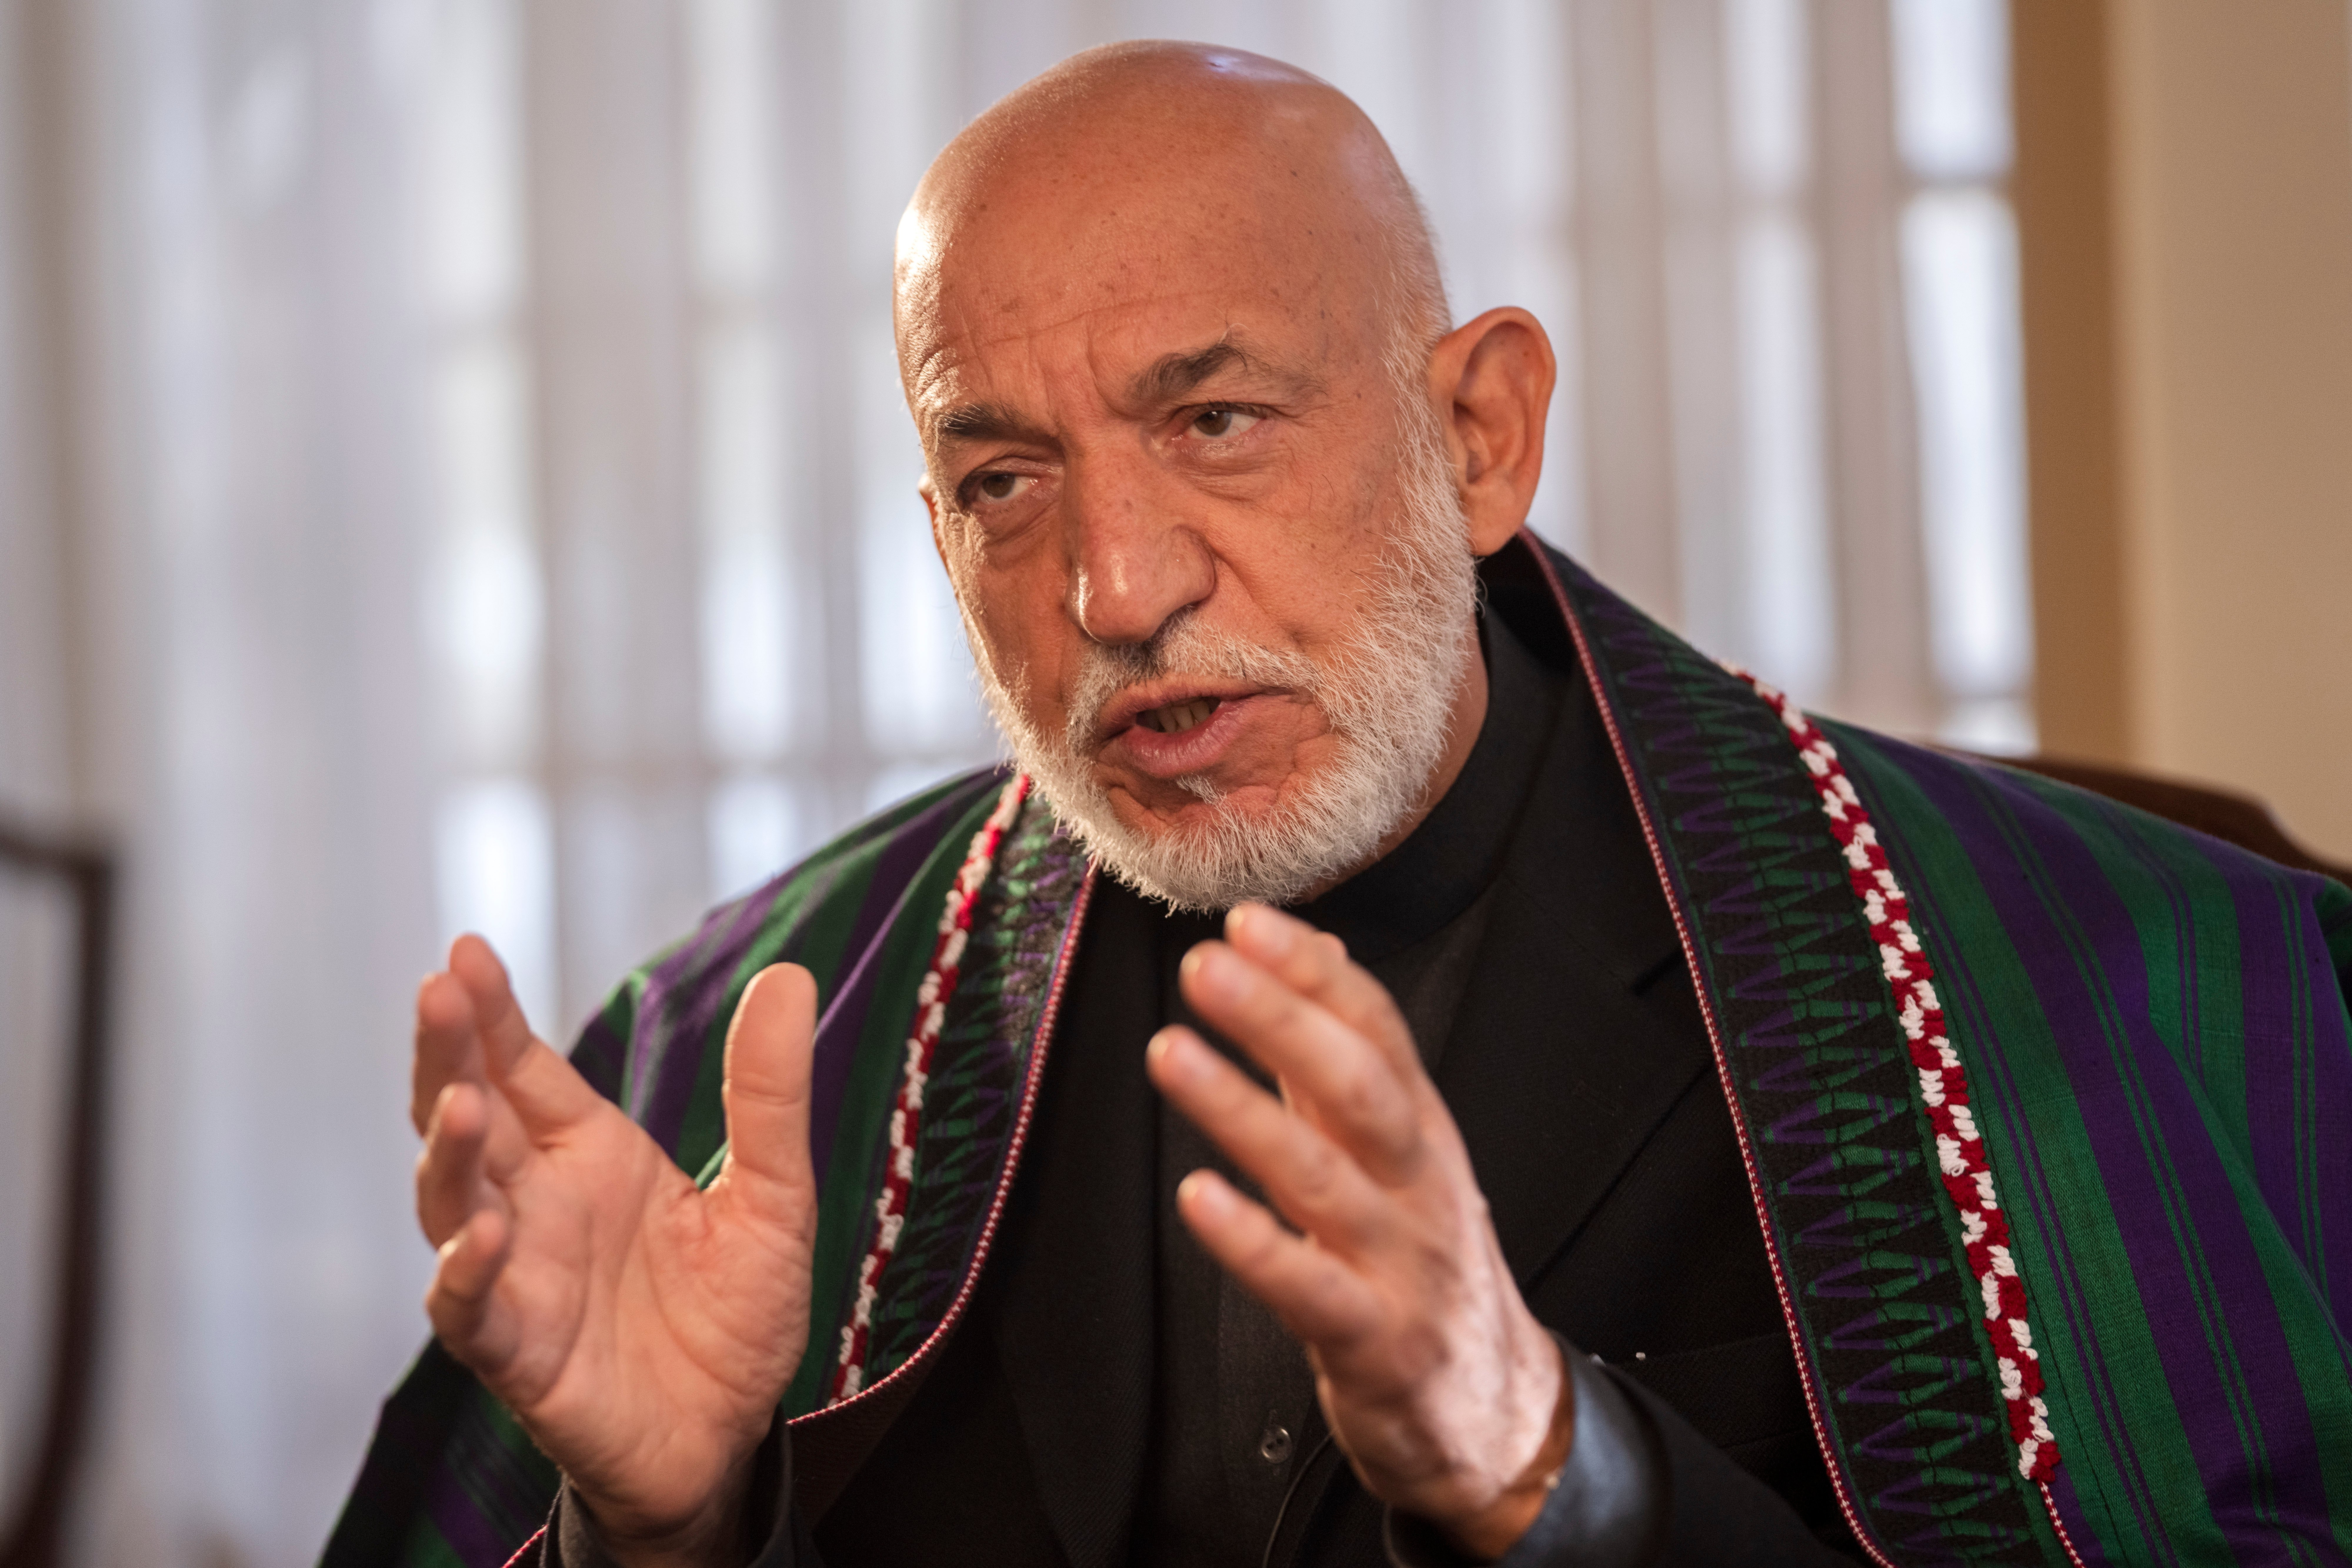 <p>Karzai was adamant that there would have been an agreement for a peaceful transition had Ghani remained in Kabul</p>